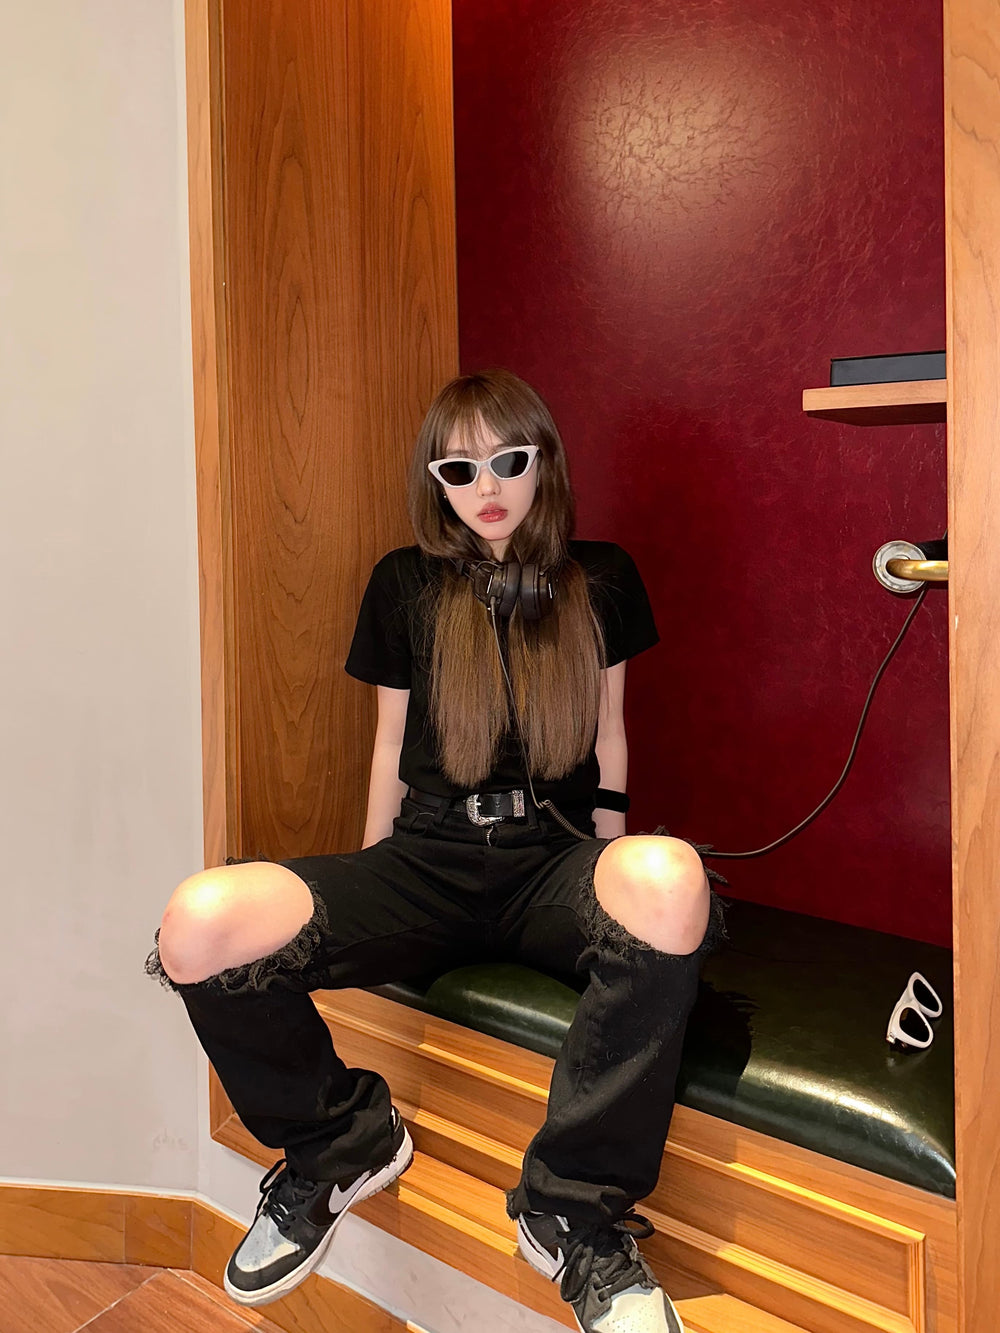 In the opulent confines of a lavishly decorated room, a person finds solace on a regal bench, exuding an air of tranquility and refinement with her trendy sunglasses.